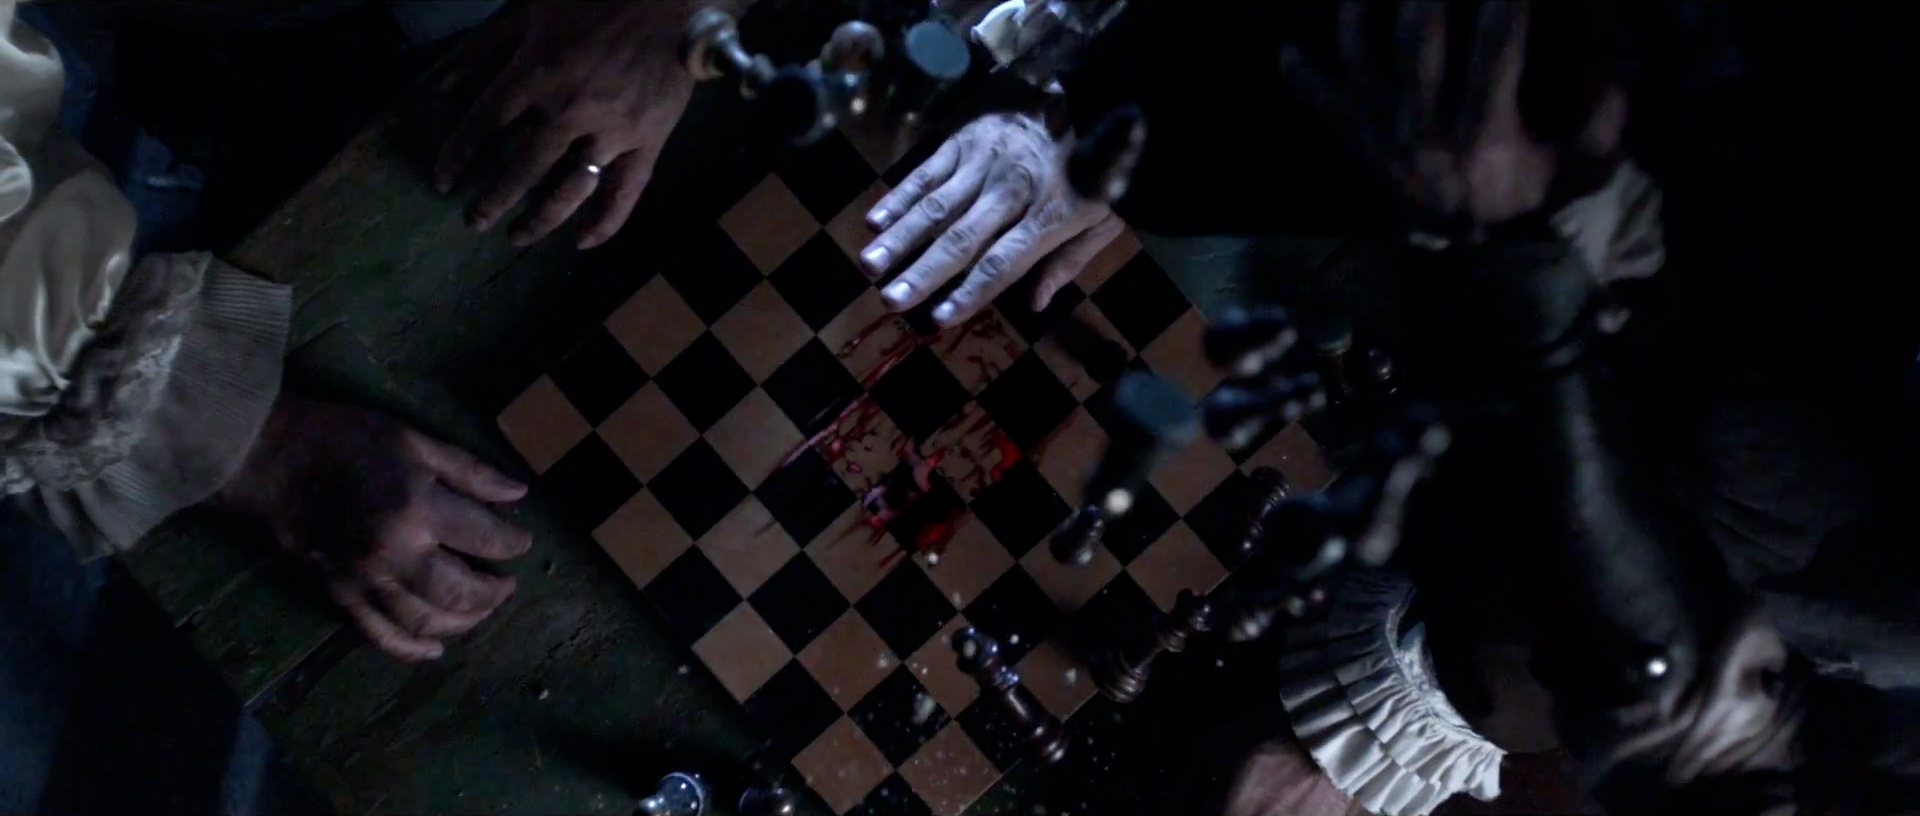 awesome-assassins-creed-short-film-checkmate-19.jpg